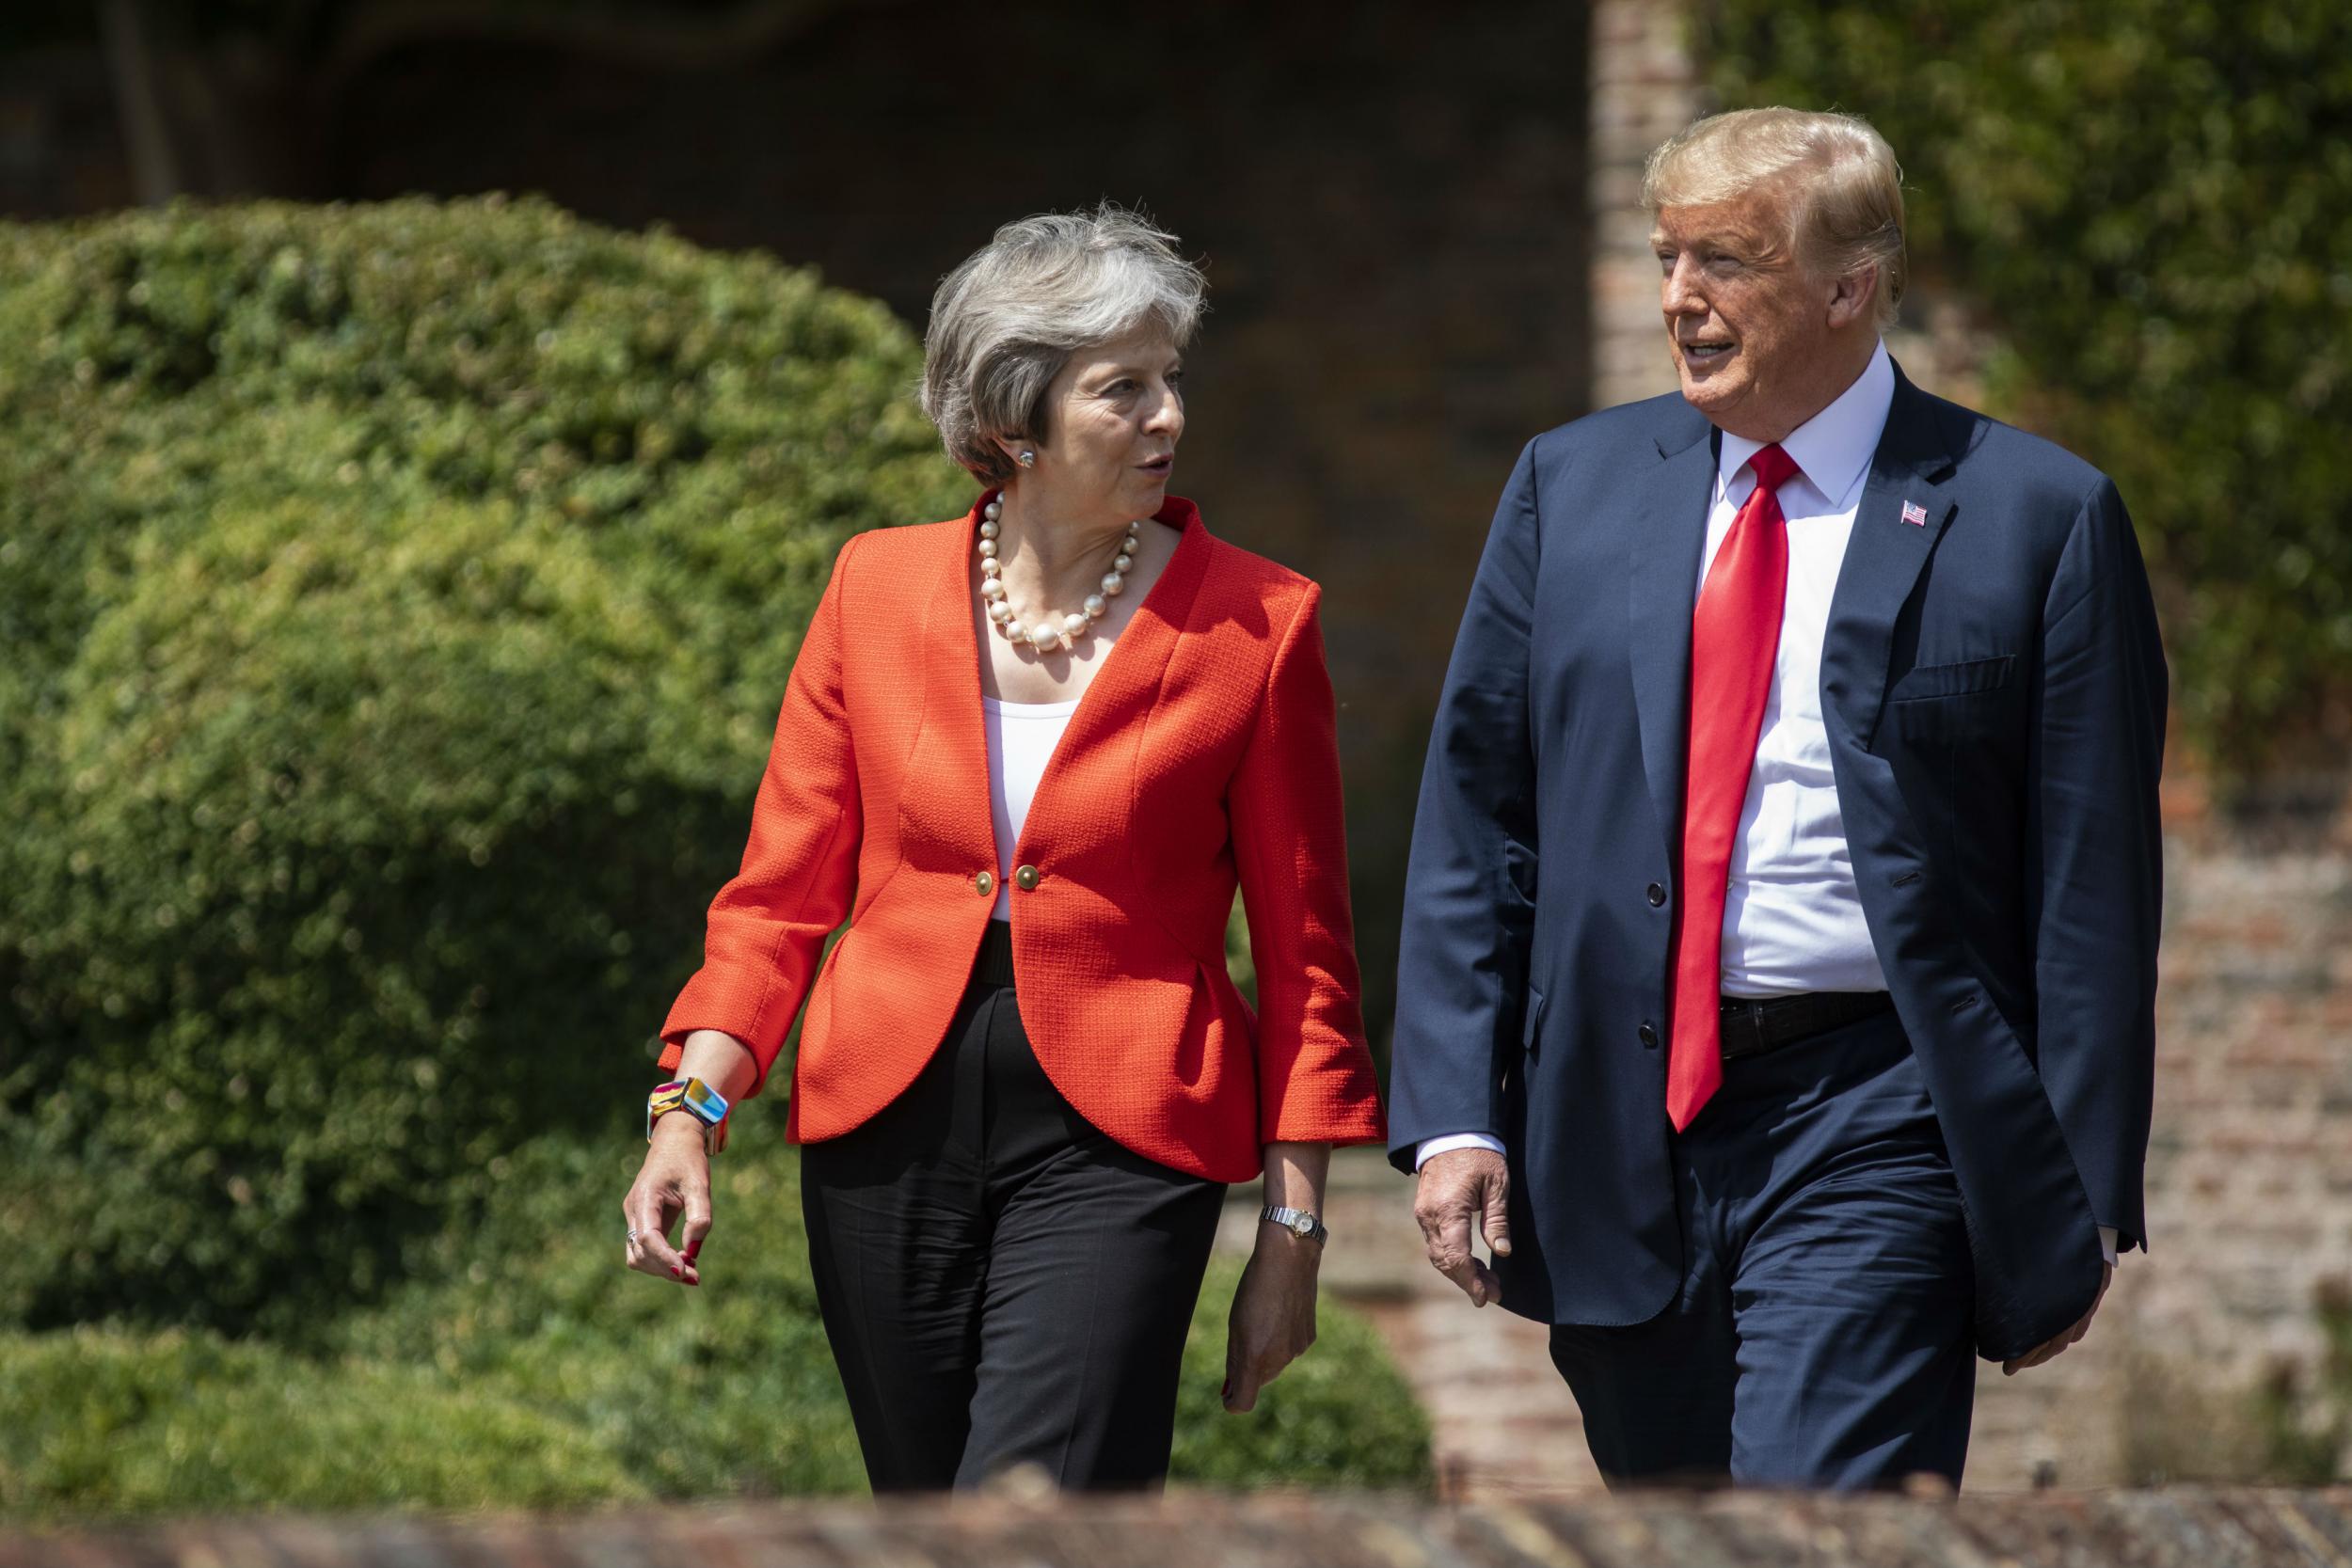 Donald Trump says he feels ‘badly’ for Theresa May following her resignation